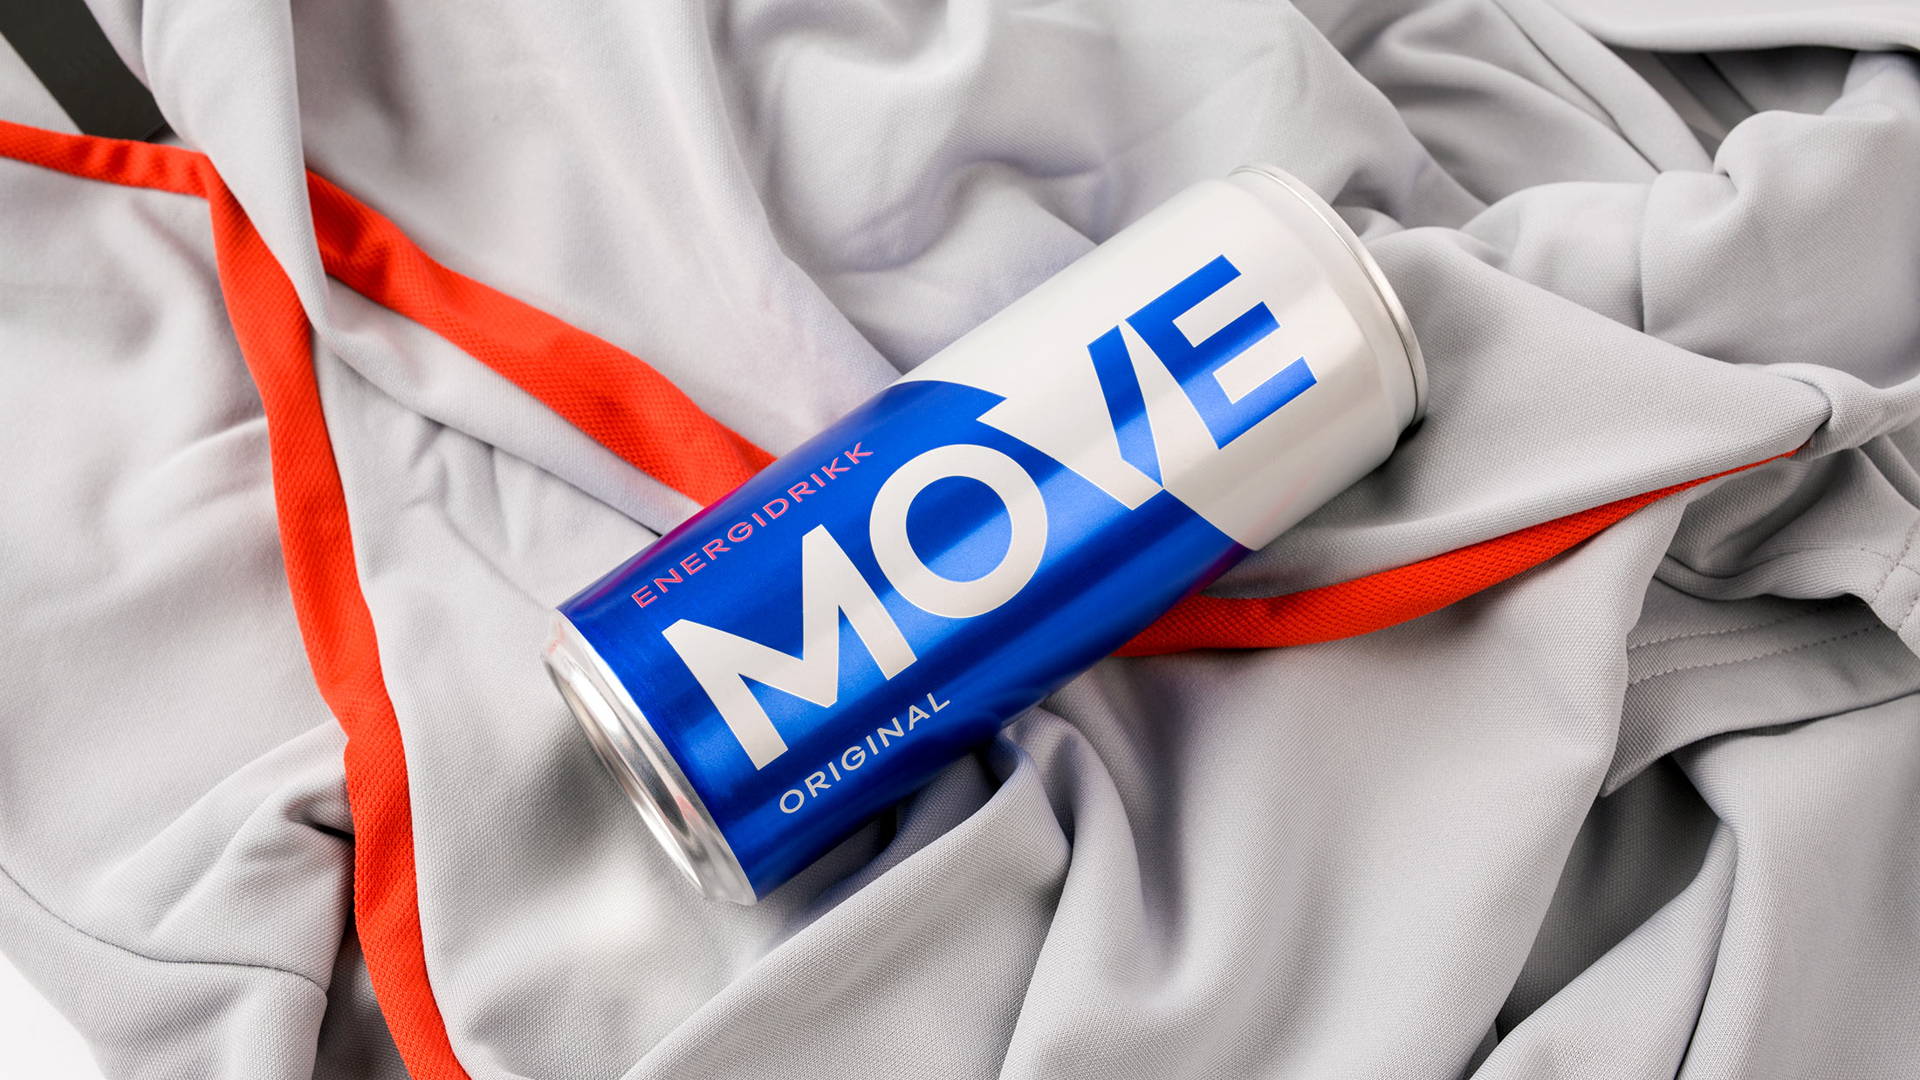 Featured image for Get Ready To "Move" With This Energy Drink